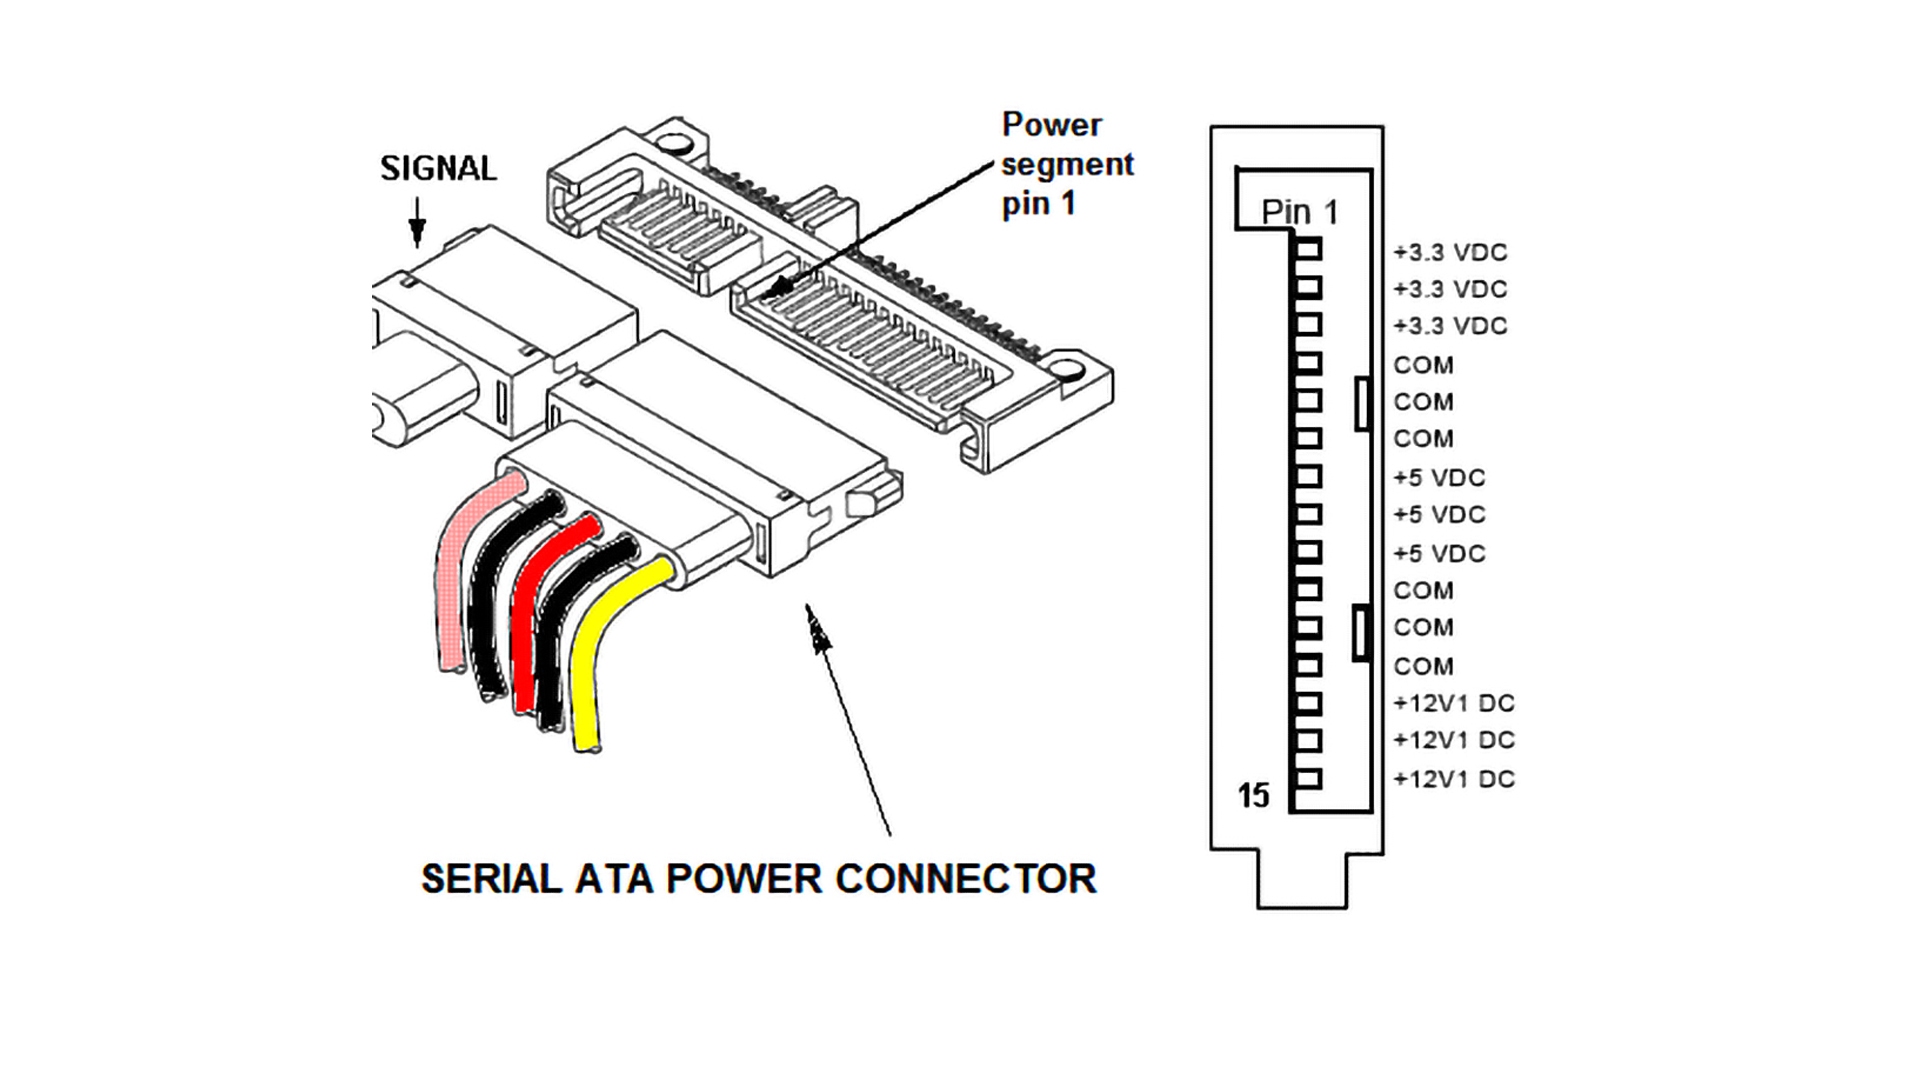 SATA Power Connector Pin Out.